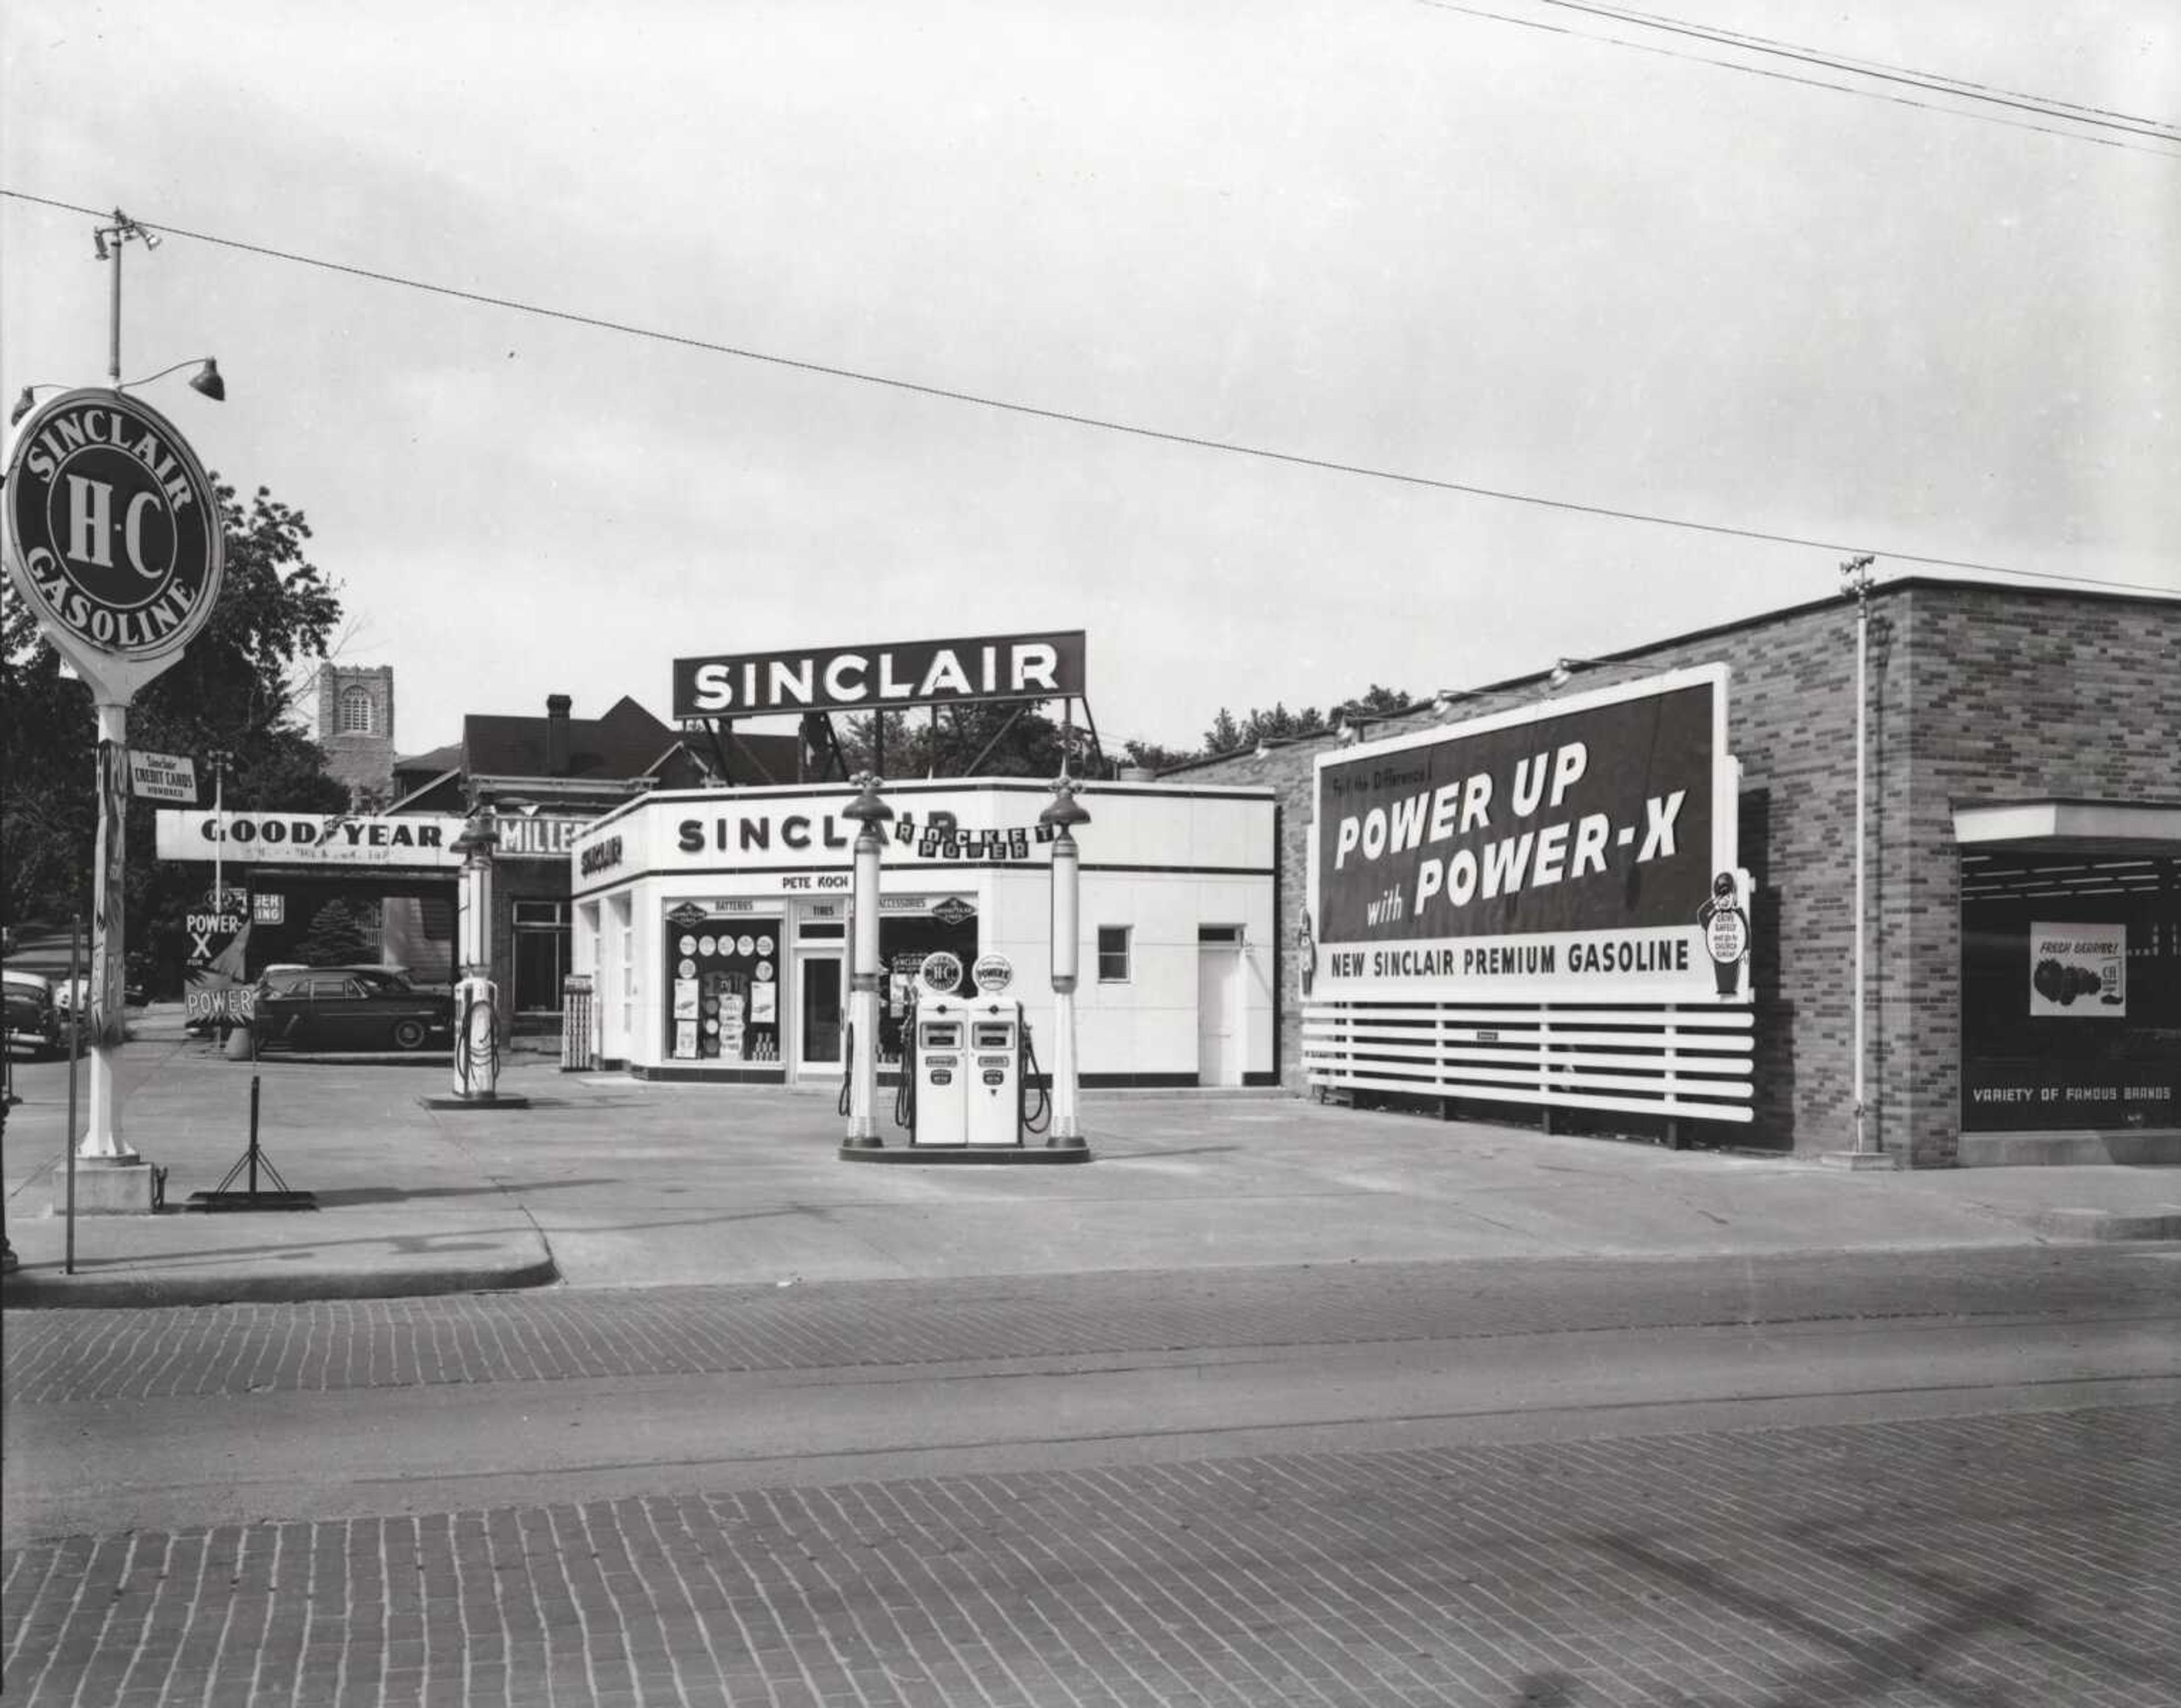 The Sinclair Gas Station still stands as a service station today at 740 Broadway.